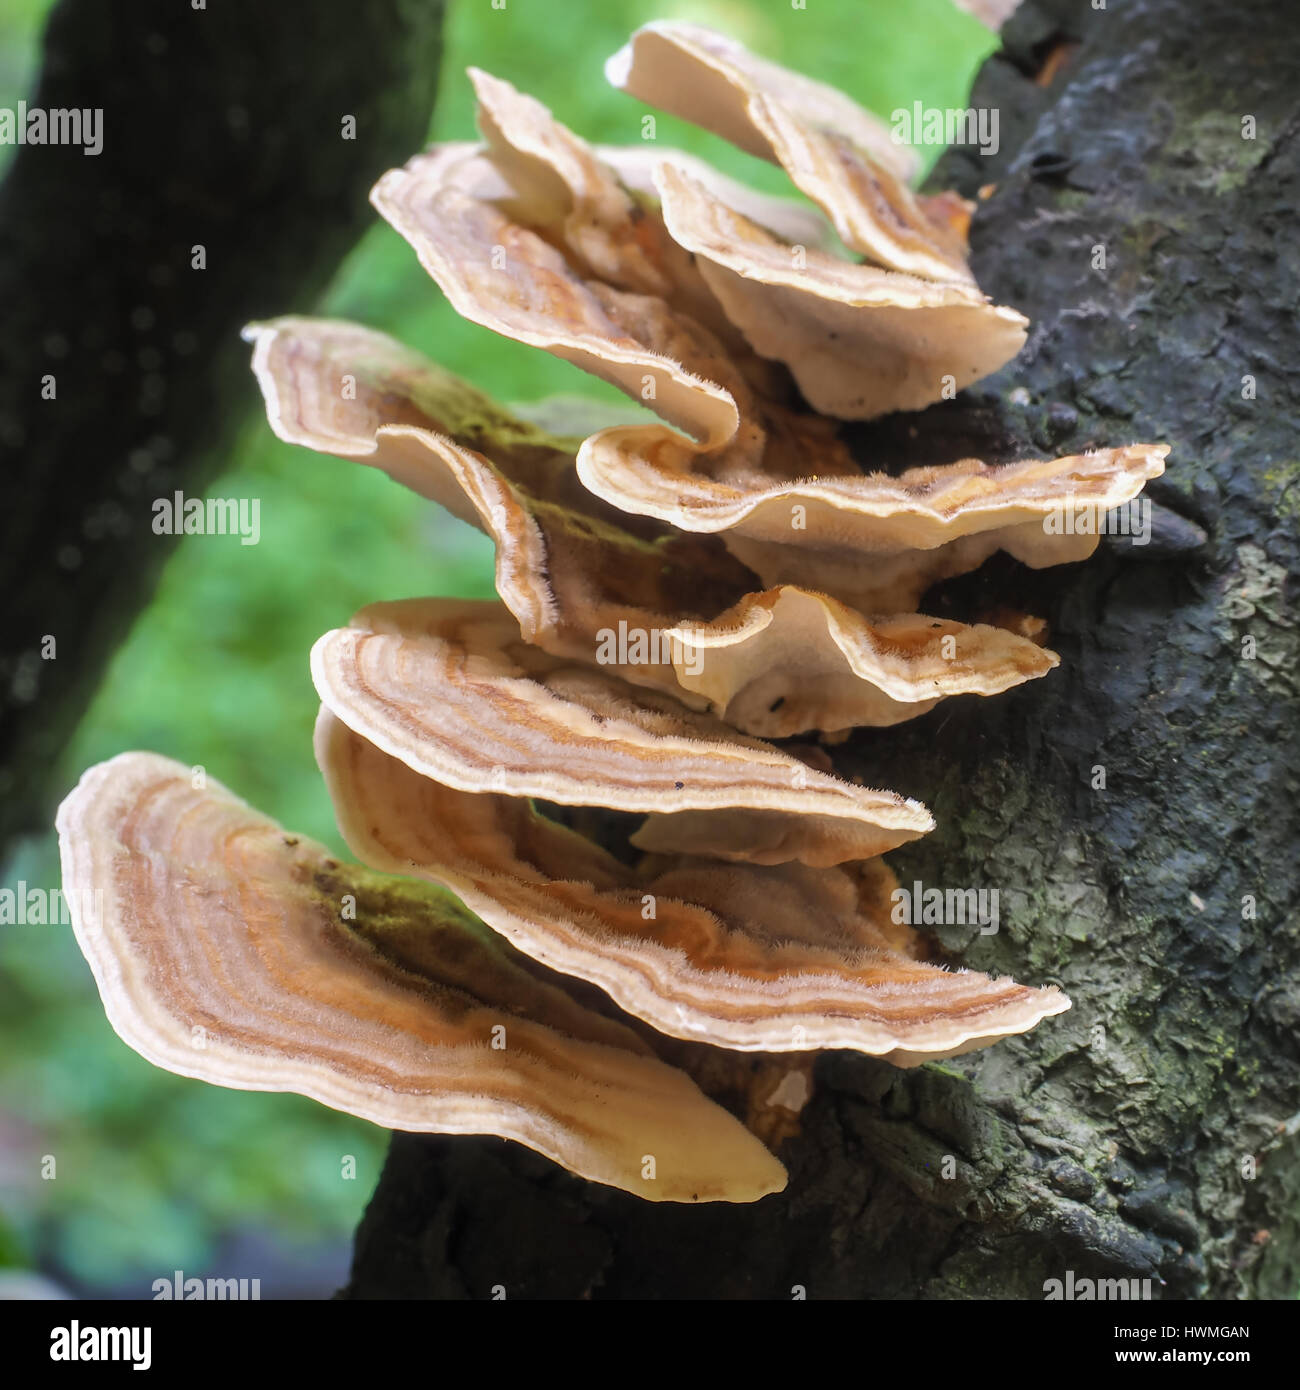 Bracket Fungus on a decaying tree branch, in close-up. Stock Photo